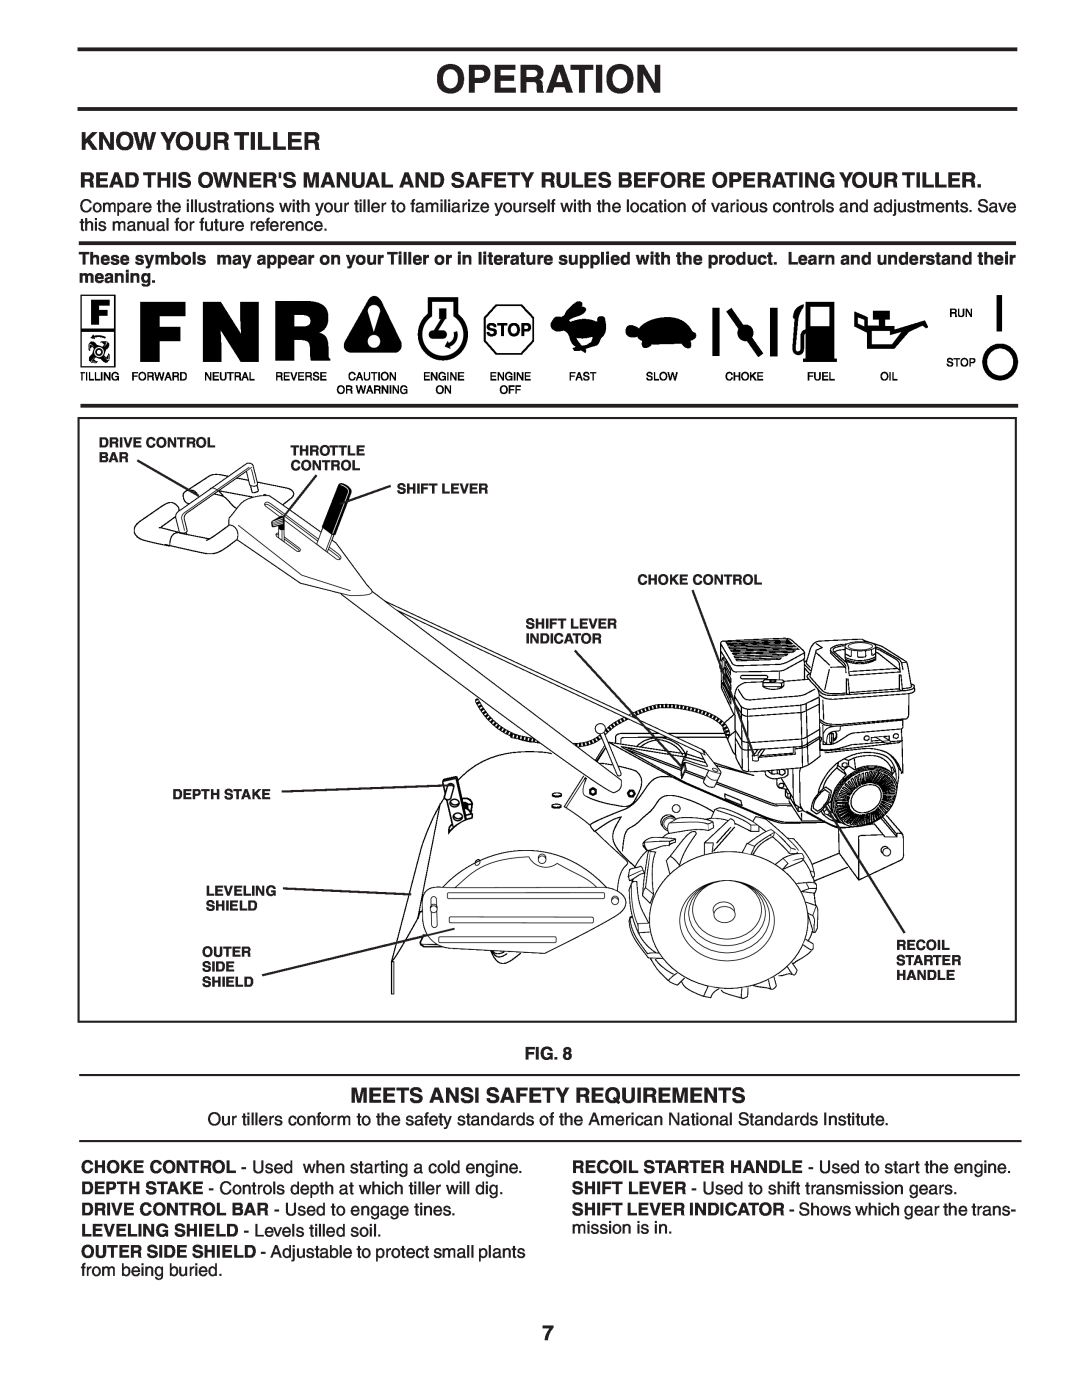 Poulan 96092001200, 403701 owner manual Operation, Know Your Tiller, Meets Ansi Safety Requirements 